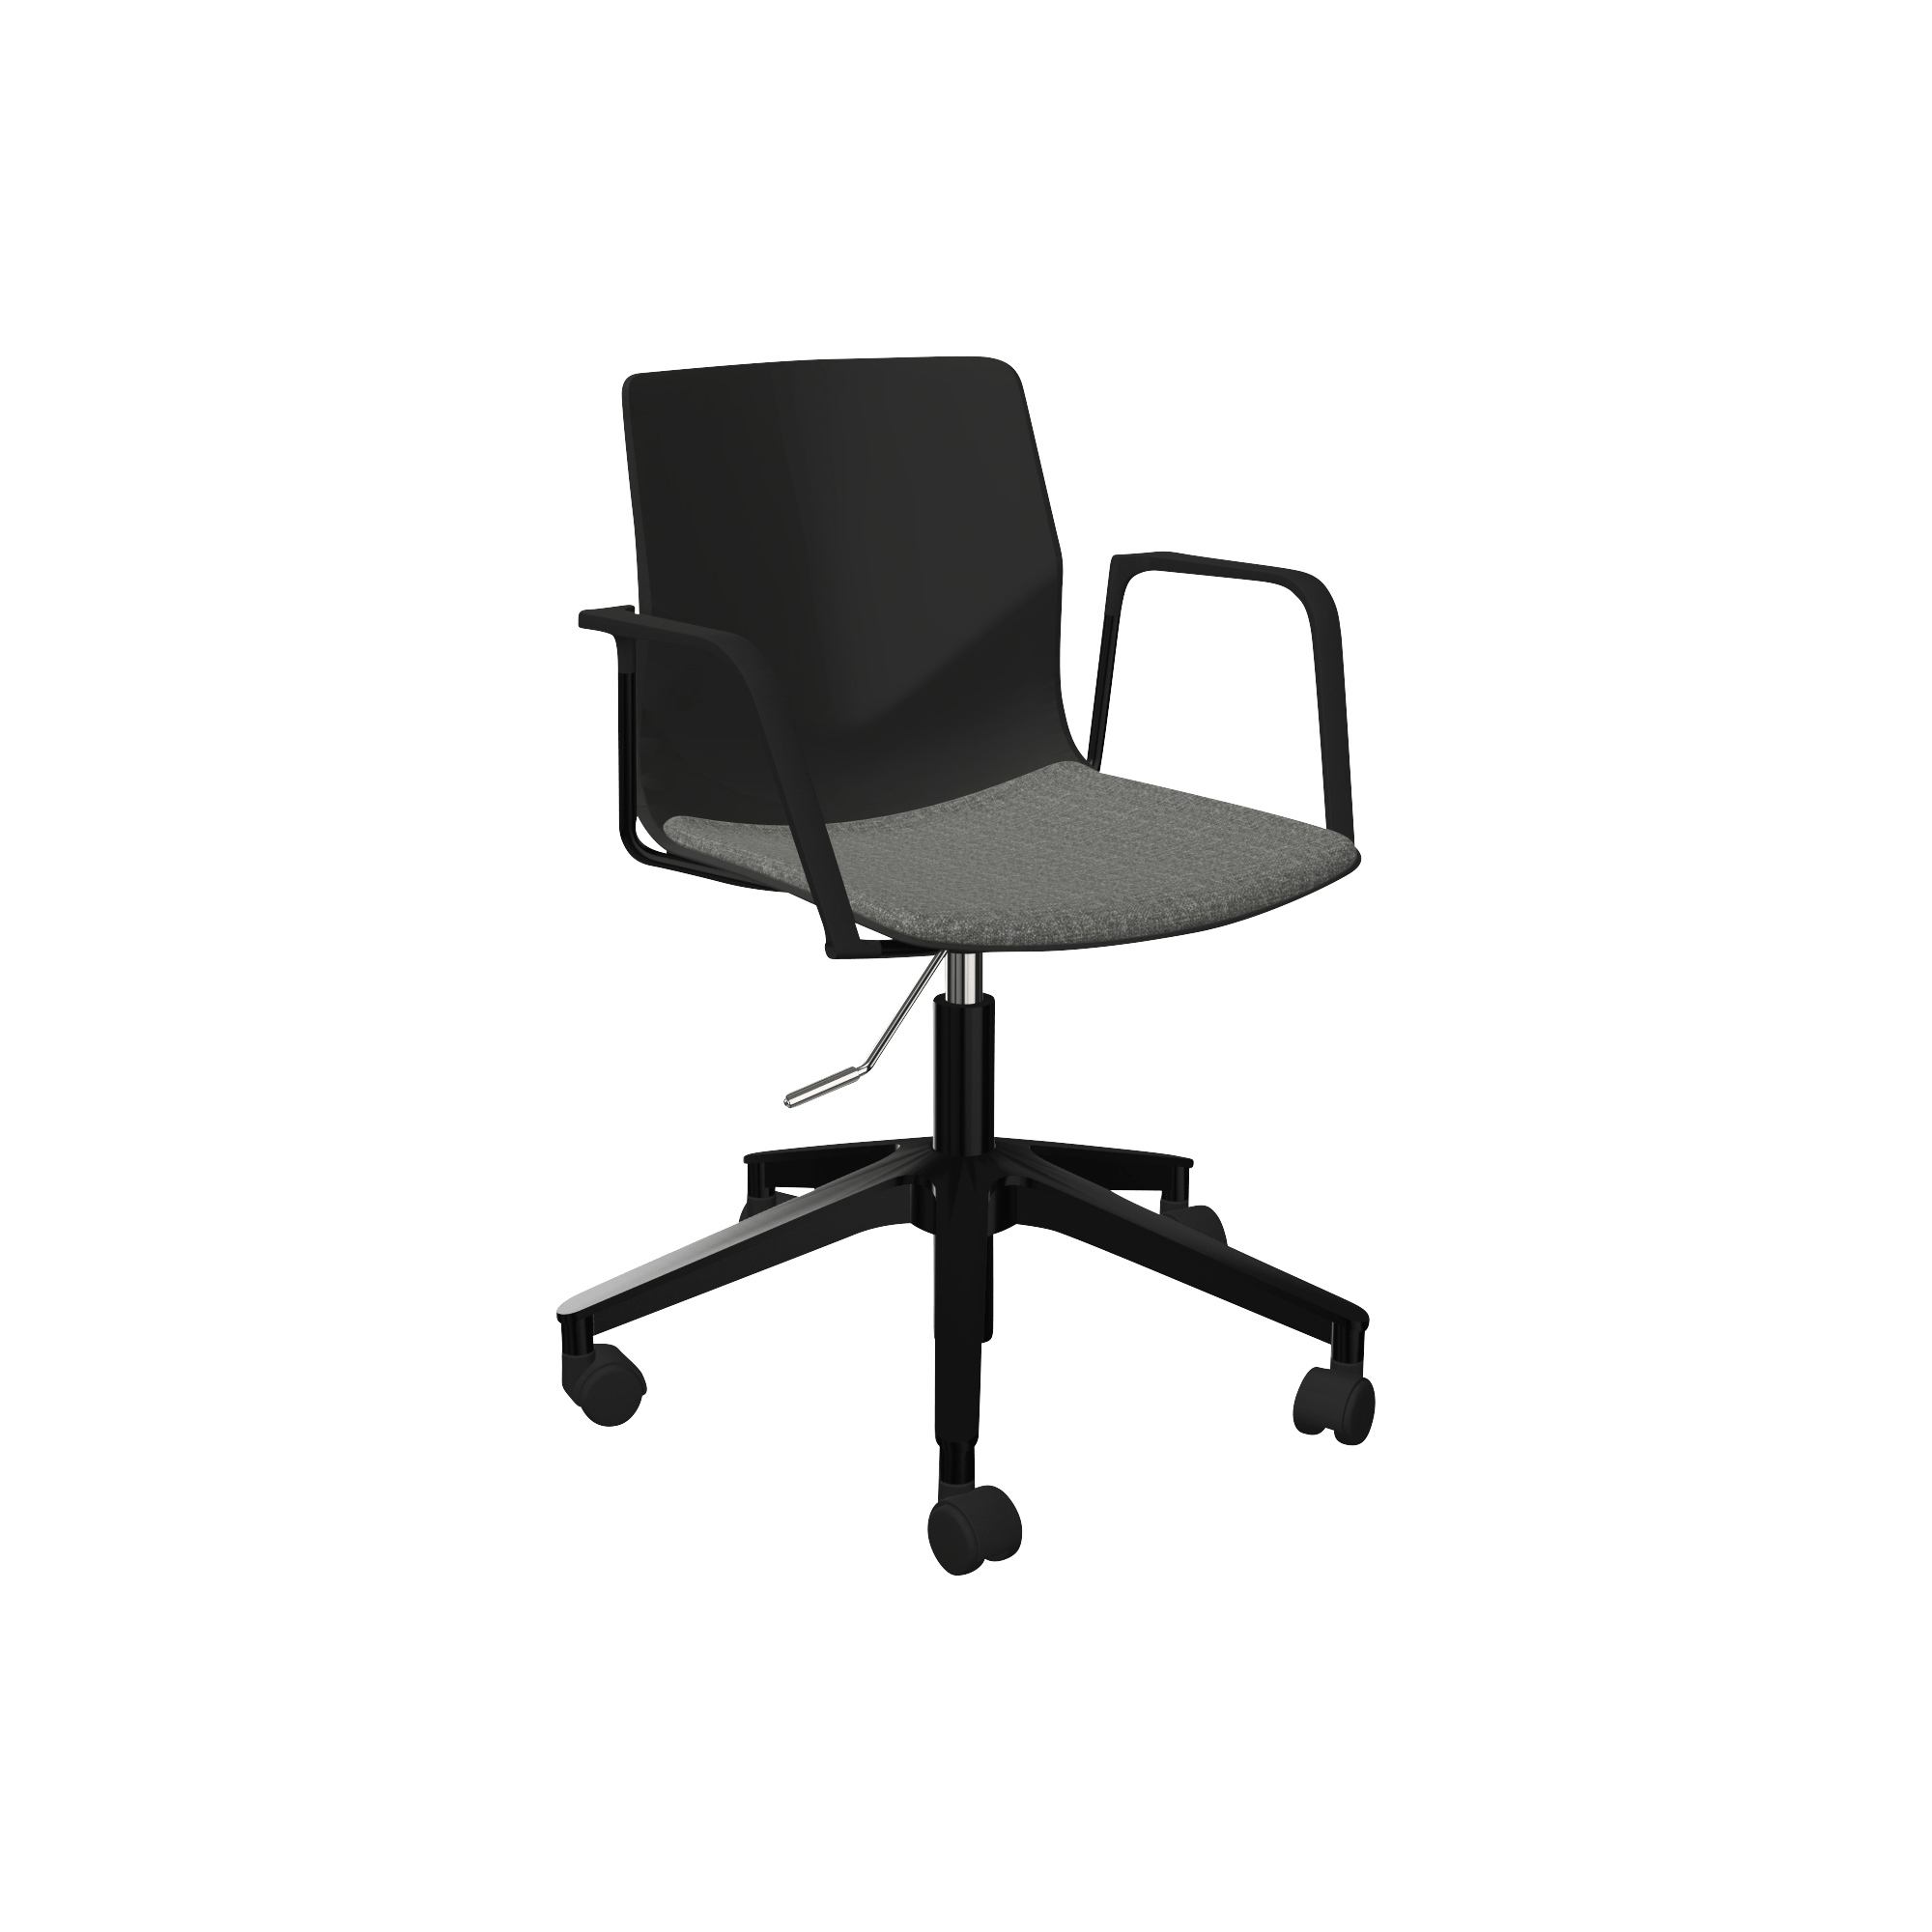 Black and grey adjustable height office chair with wheels and arm rests